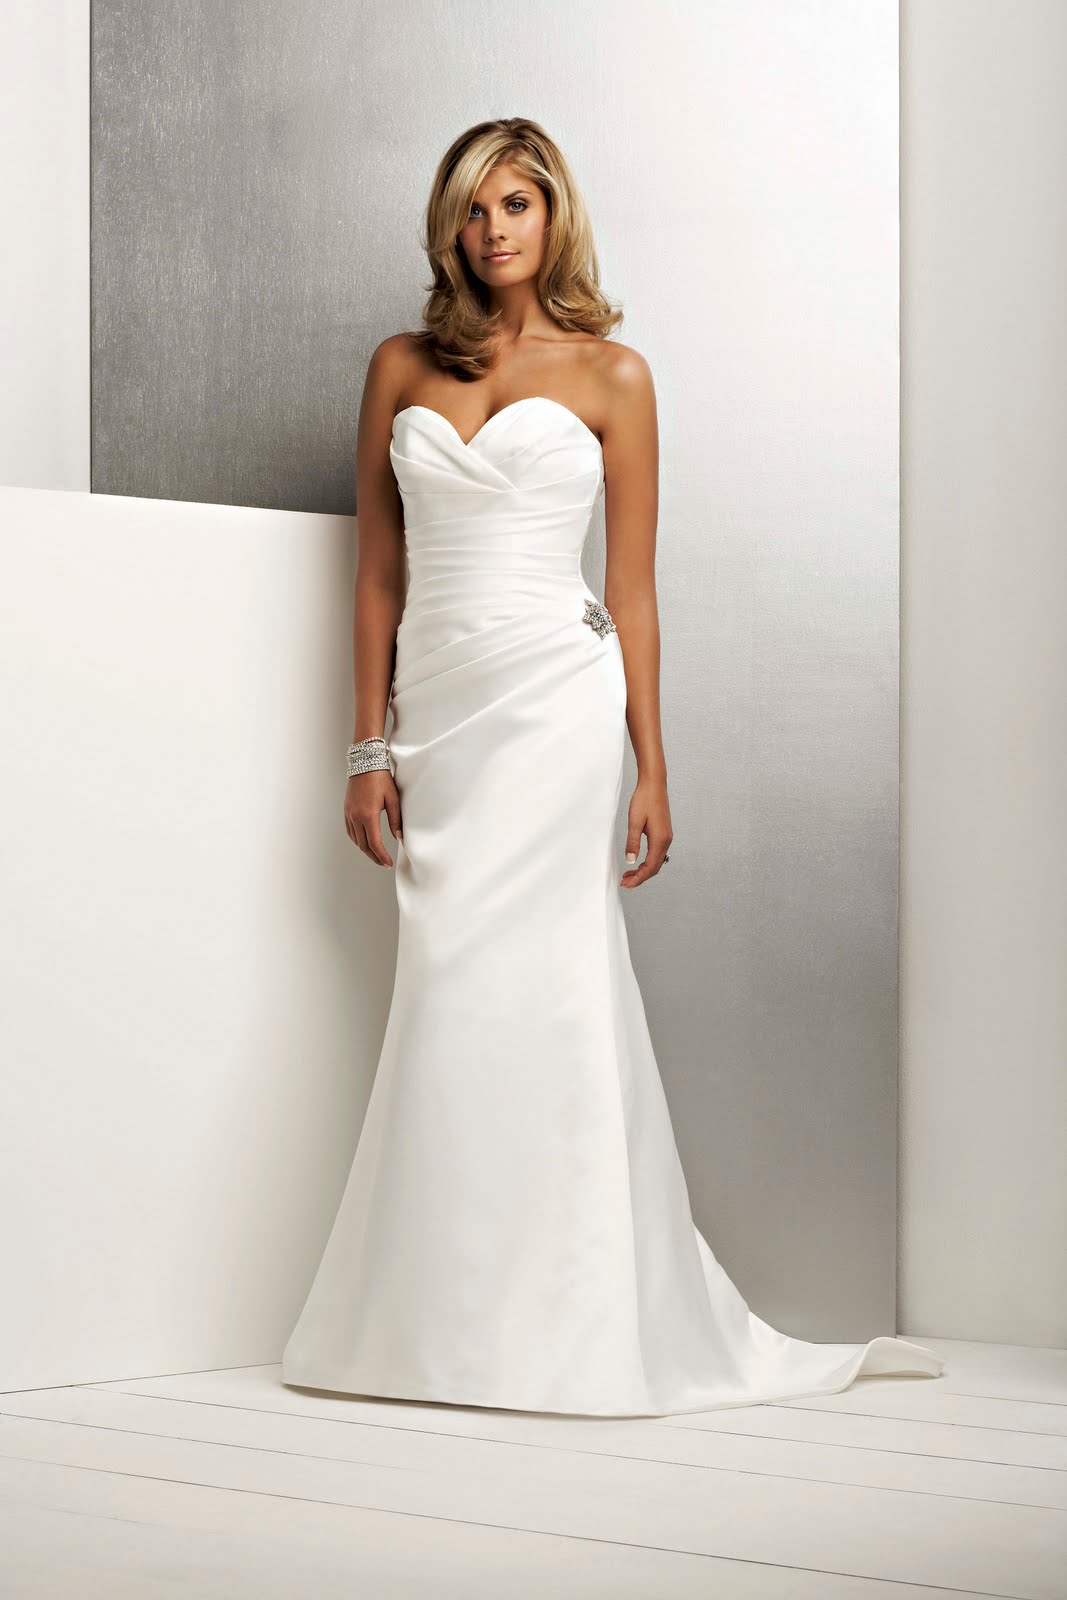 [jane] dimplemaggot.blogspot.com: Wedding Gowns I'd Like to Wear for My ...